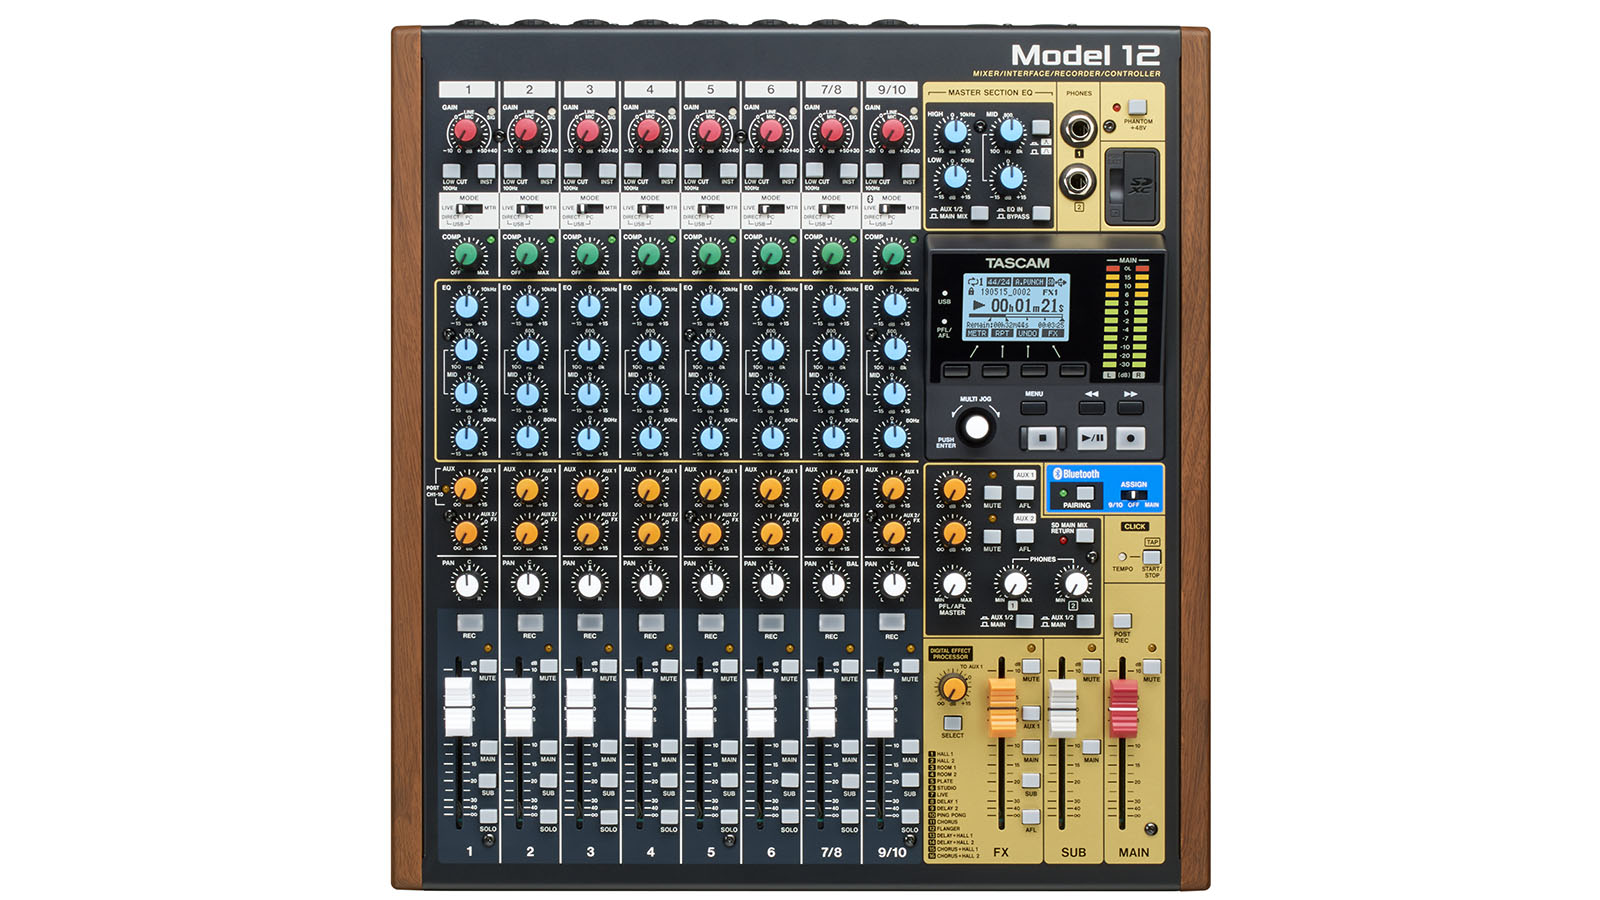 TASCAM Ships Model 12 Audio and Multimedia Production Switcher